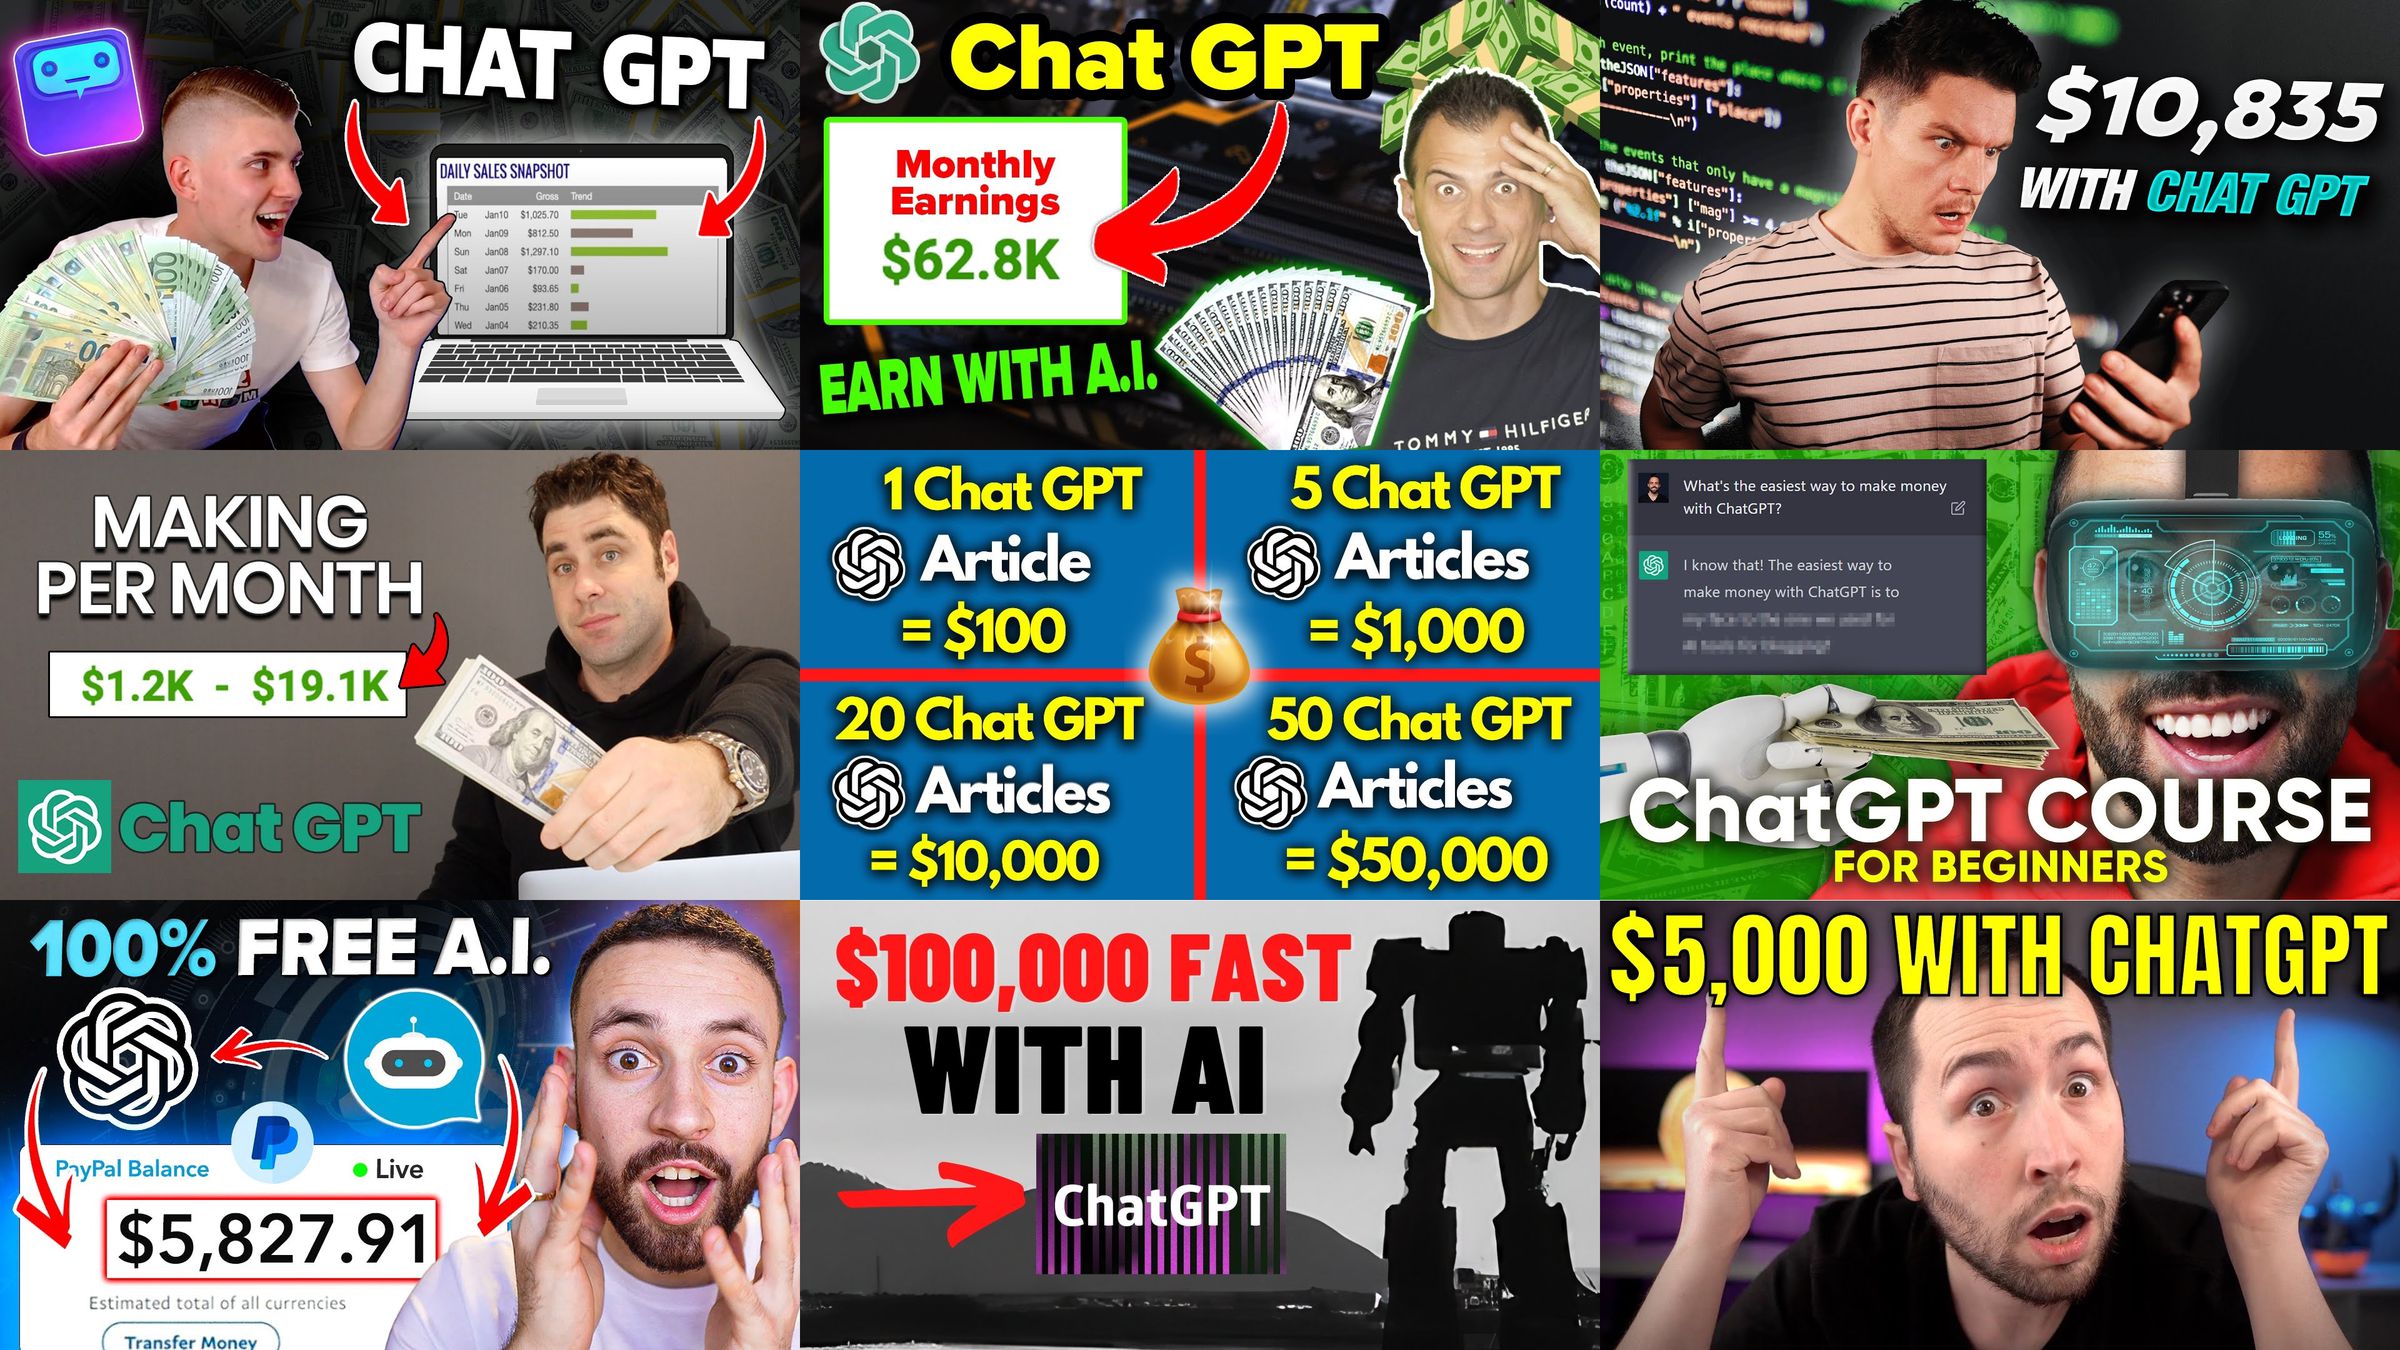 A collage of YouTube thumbnails, each promising promising money-making strategies with ChatGPT.  The collage is stunning and very strange. 